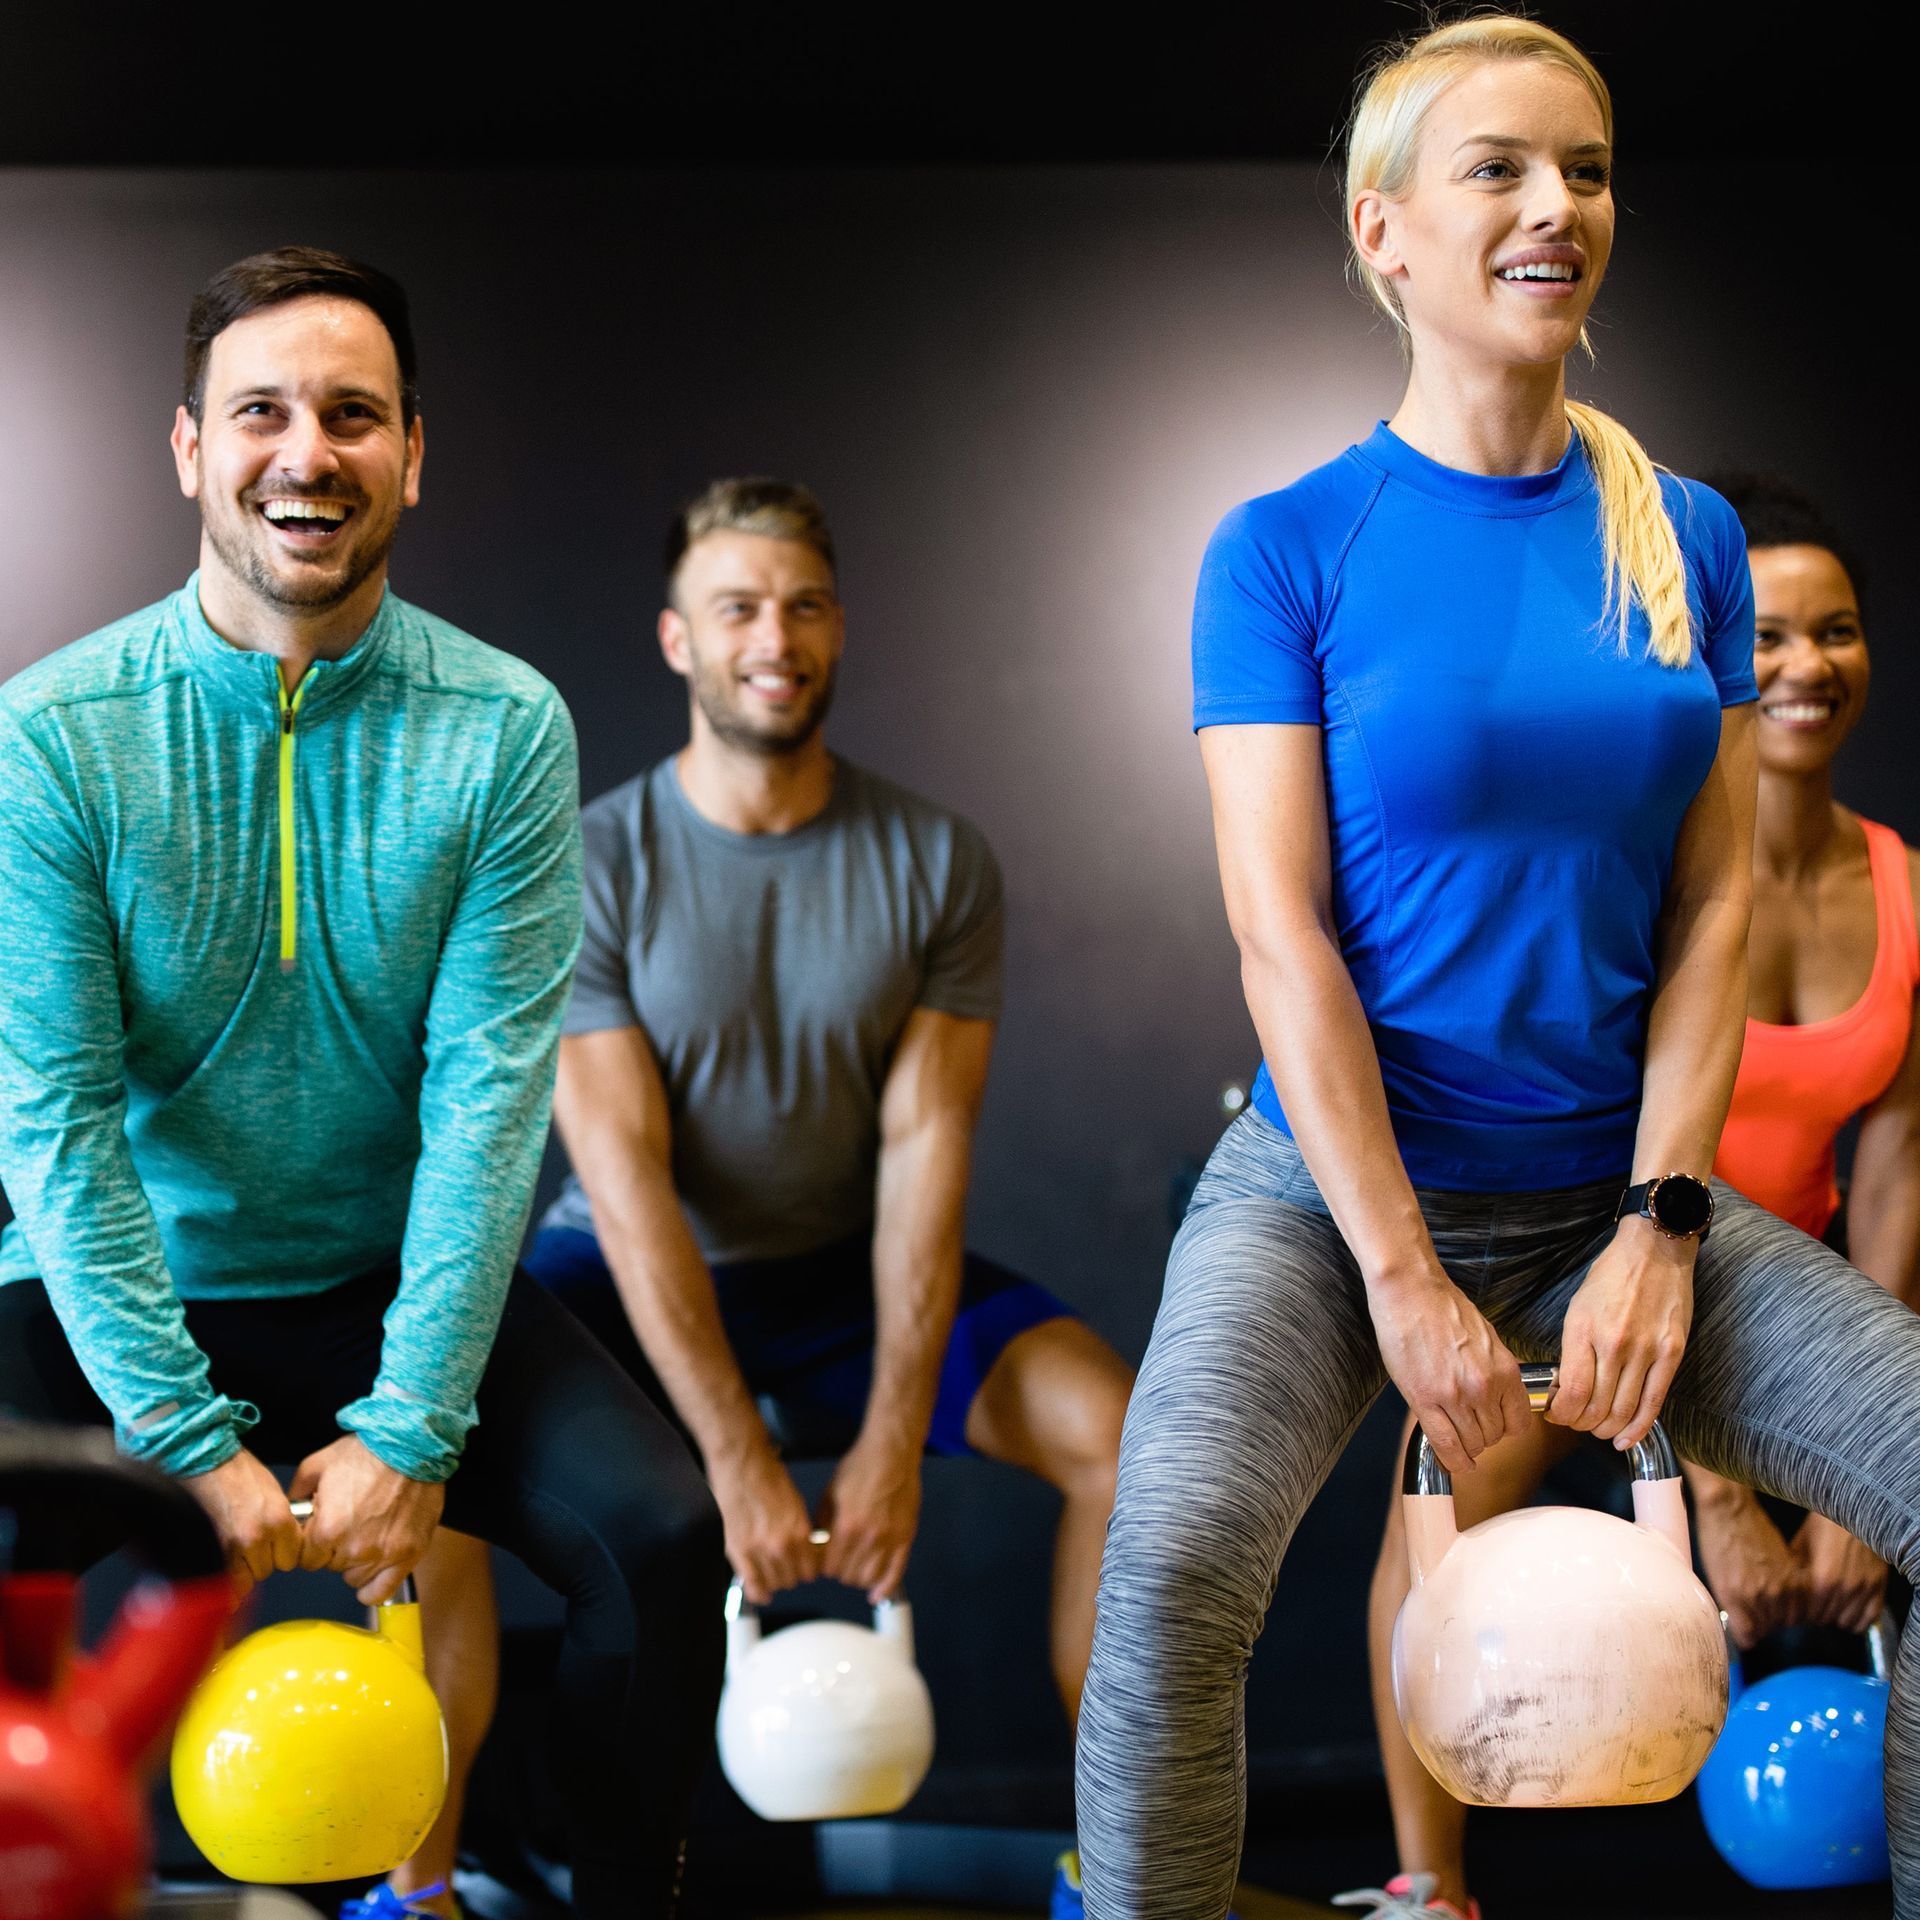 a group of people are lifting kettlebells in a gym